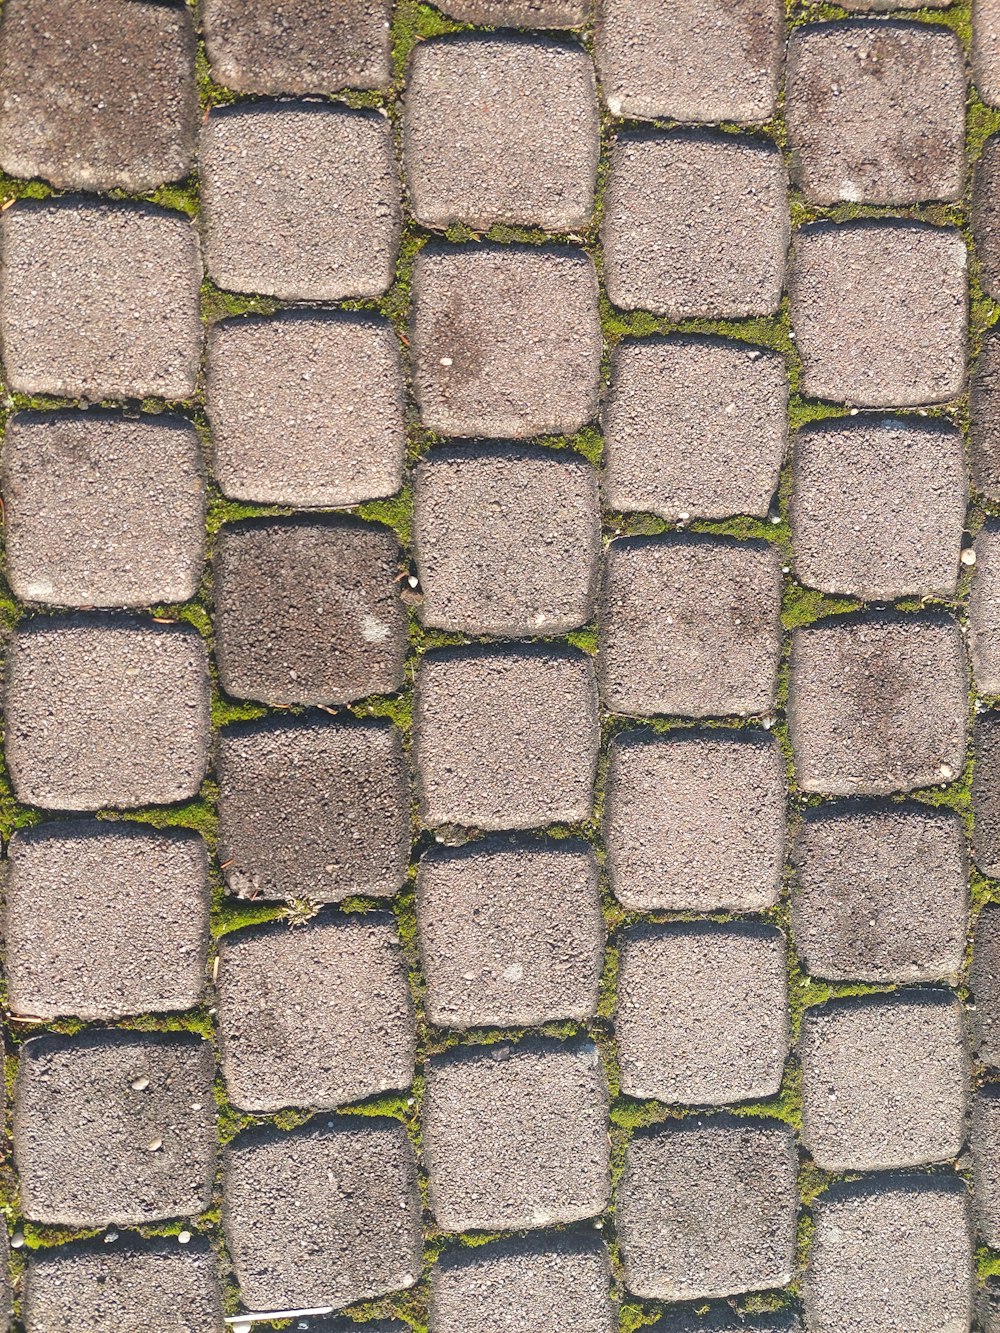 a close up of a cobblestone street with grass growing on it